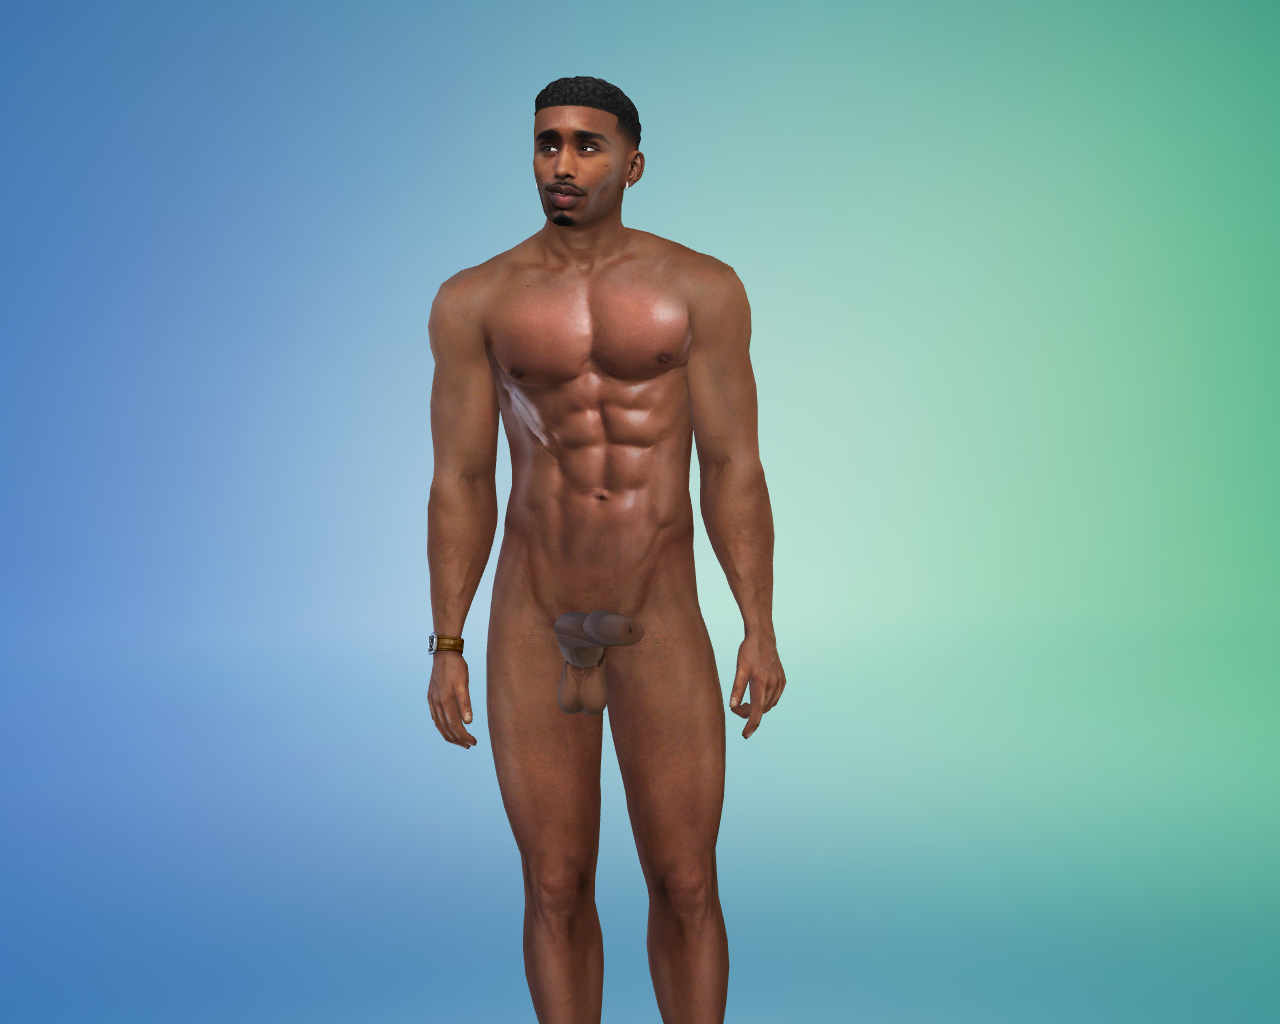 ahmed ajet recommends sims 3 penis mod pic